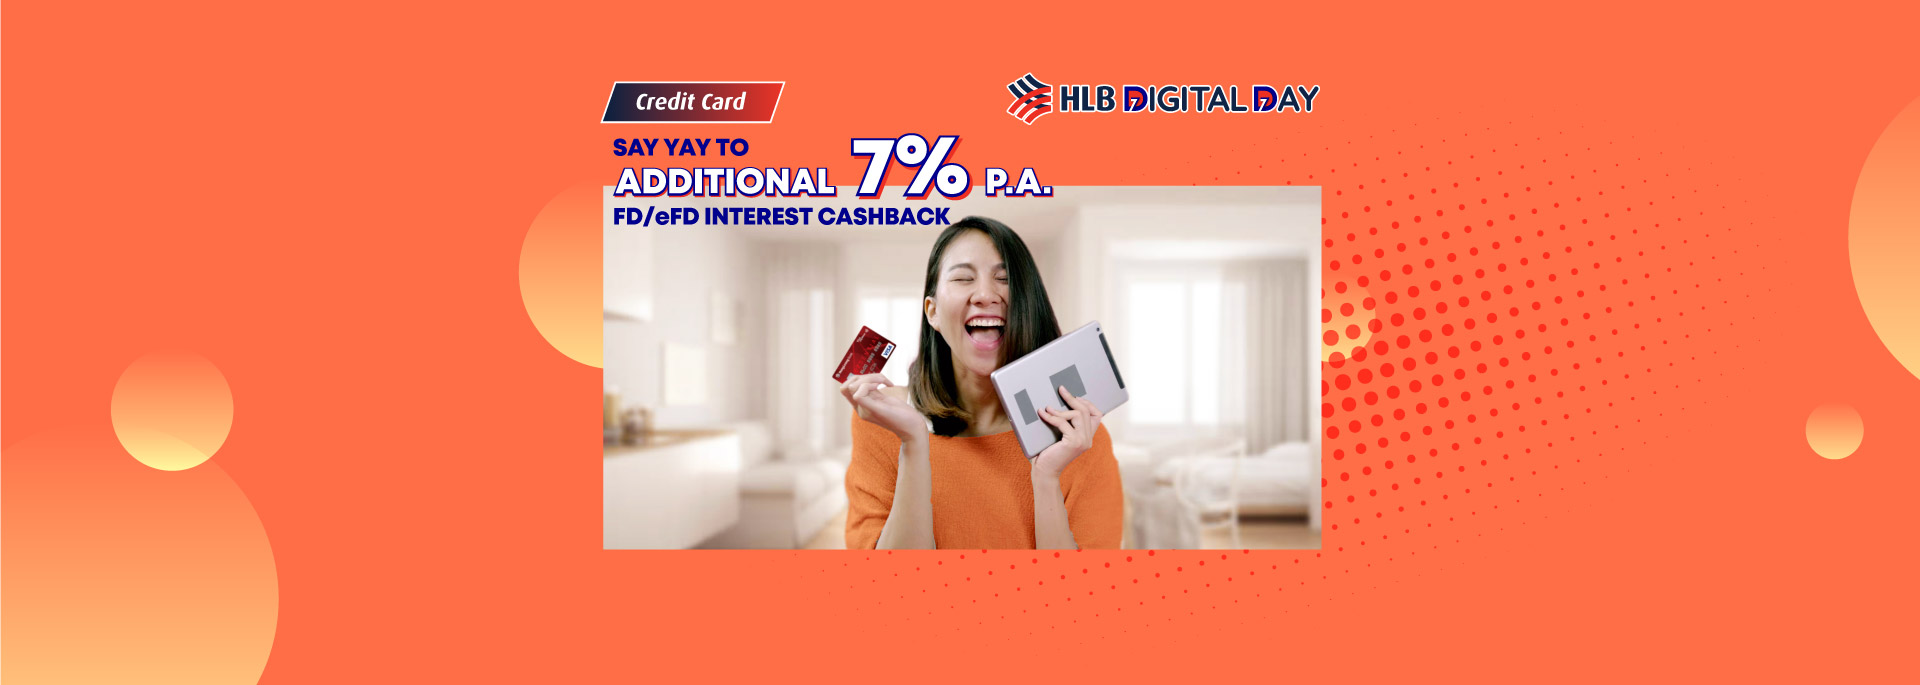 Say yay to additional 7% p.a. FD/eFD Interest Cashback